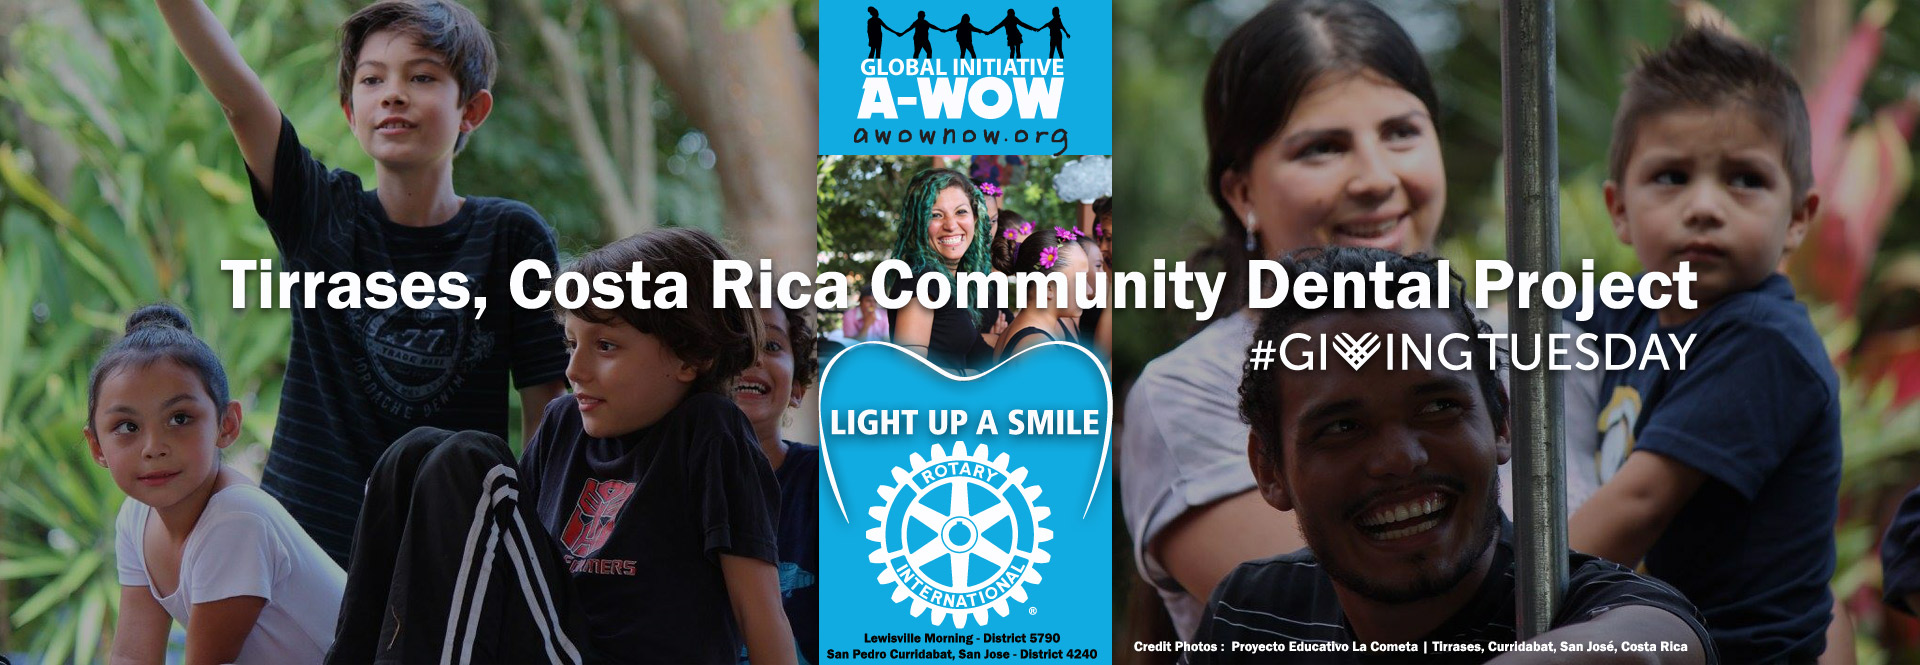 #givingtuesday A-WOW light up a smile Dental Community Project Costa Rica